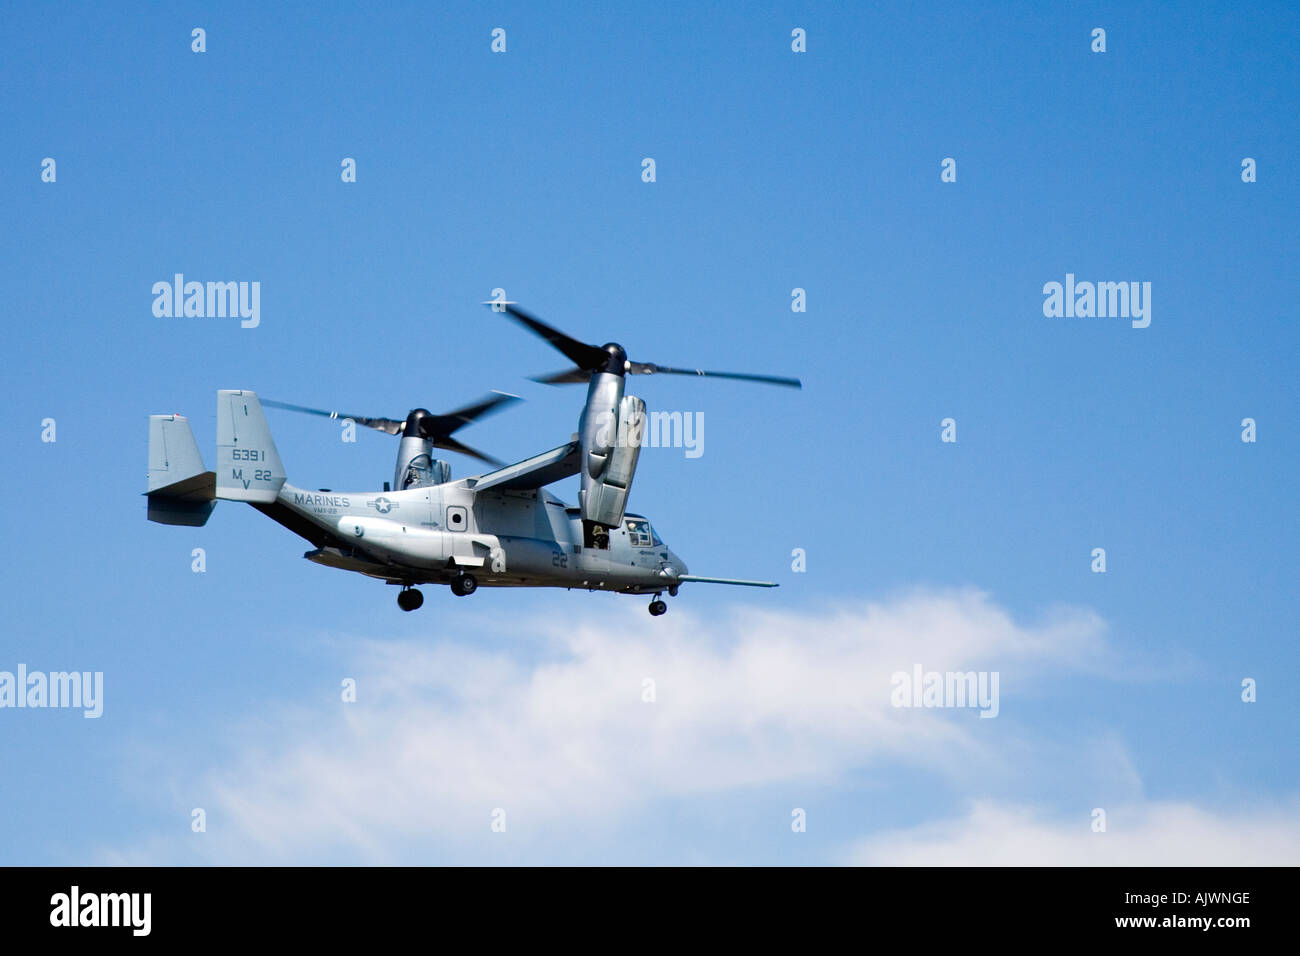 V 22 Osprey tiltrotor aircraft flying in blue skies at the RAF International Air Show in Fairford Gloucestershire in 2006 Stock Photo